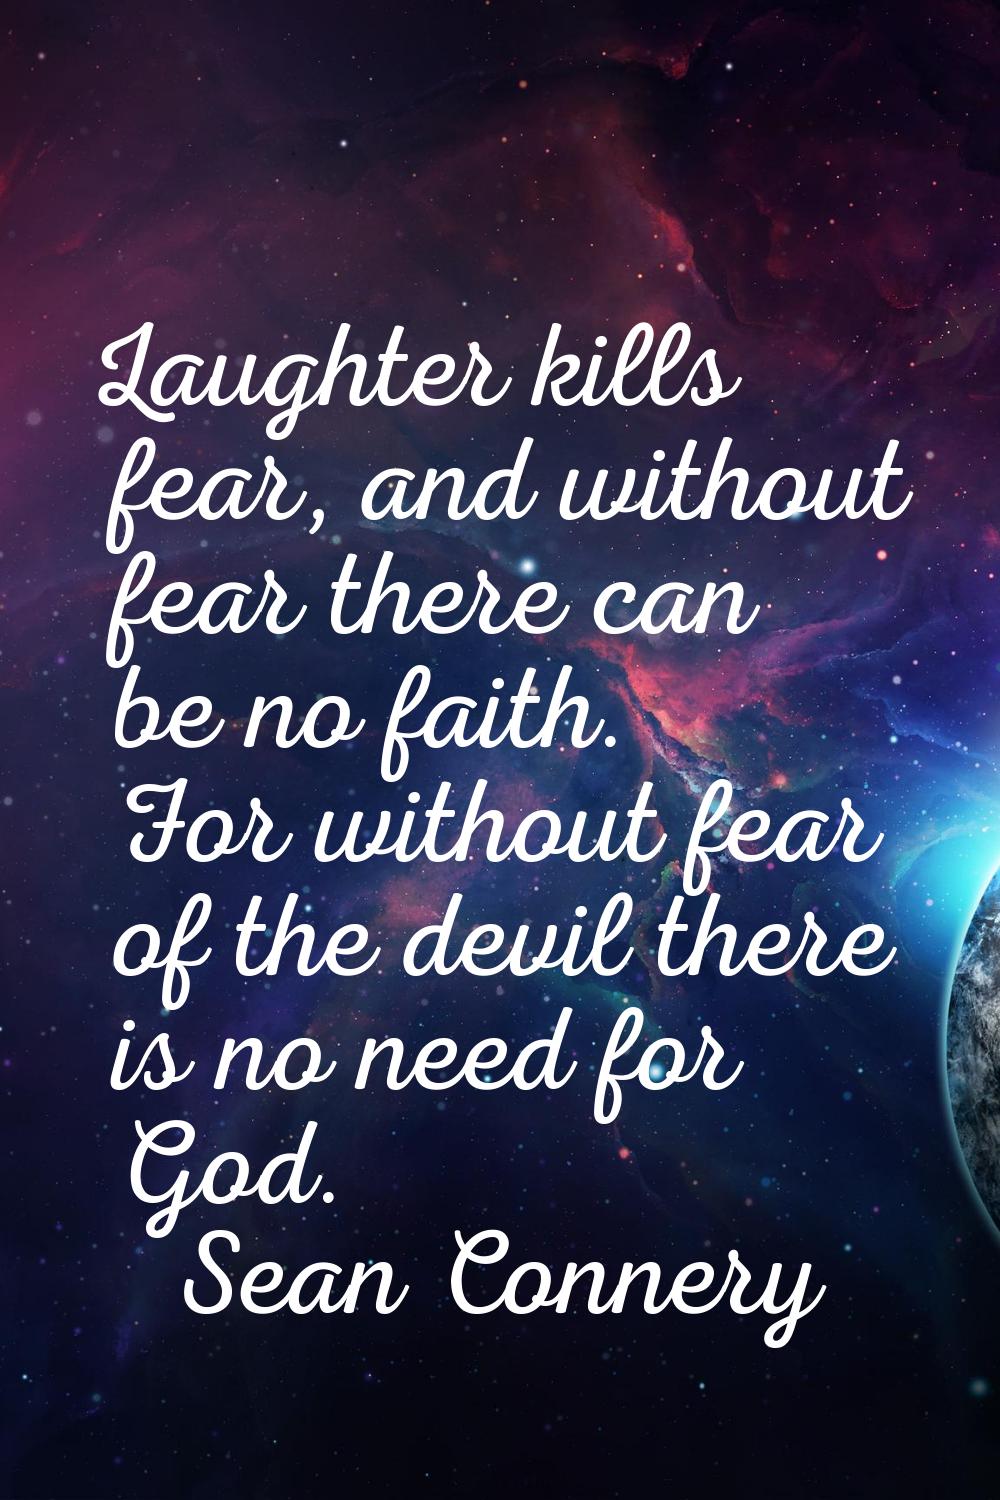 Laughter kills fear, and without fear there can be no faith. For without fear of the devil there is